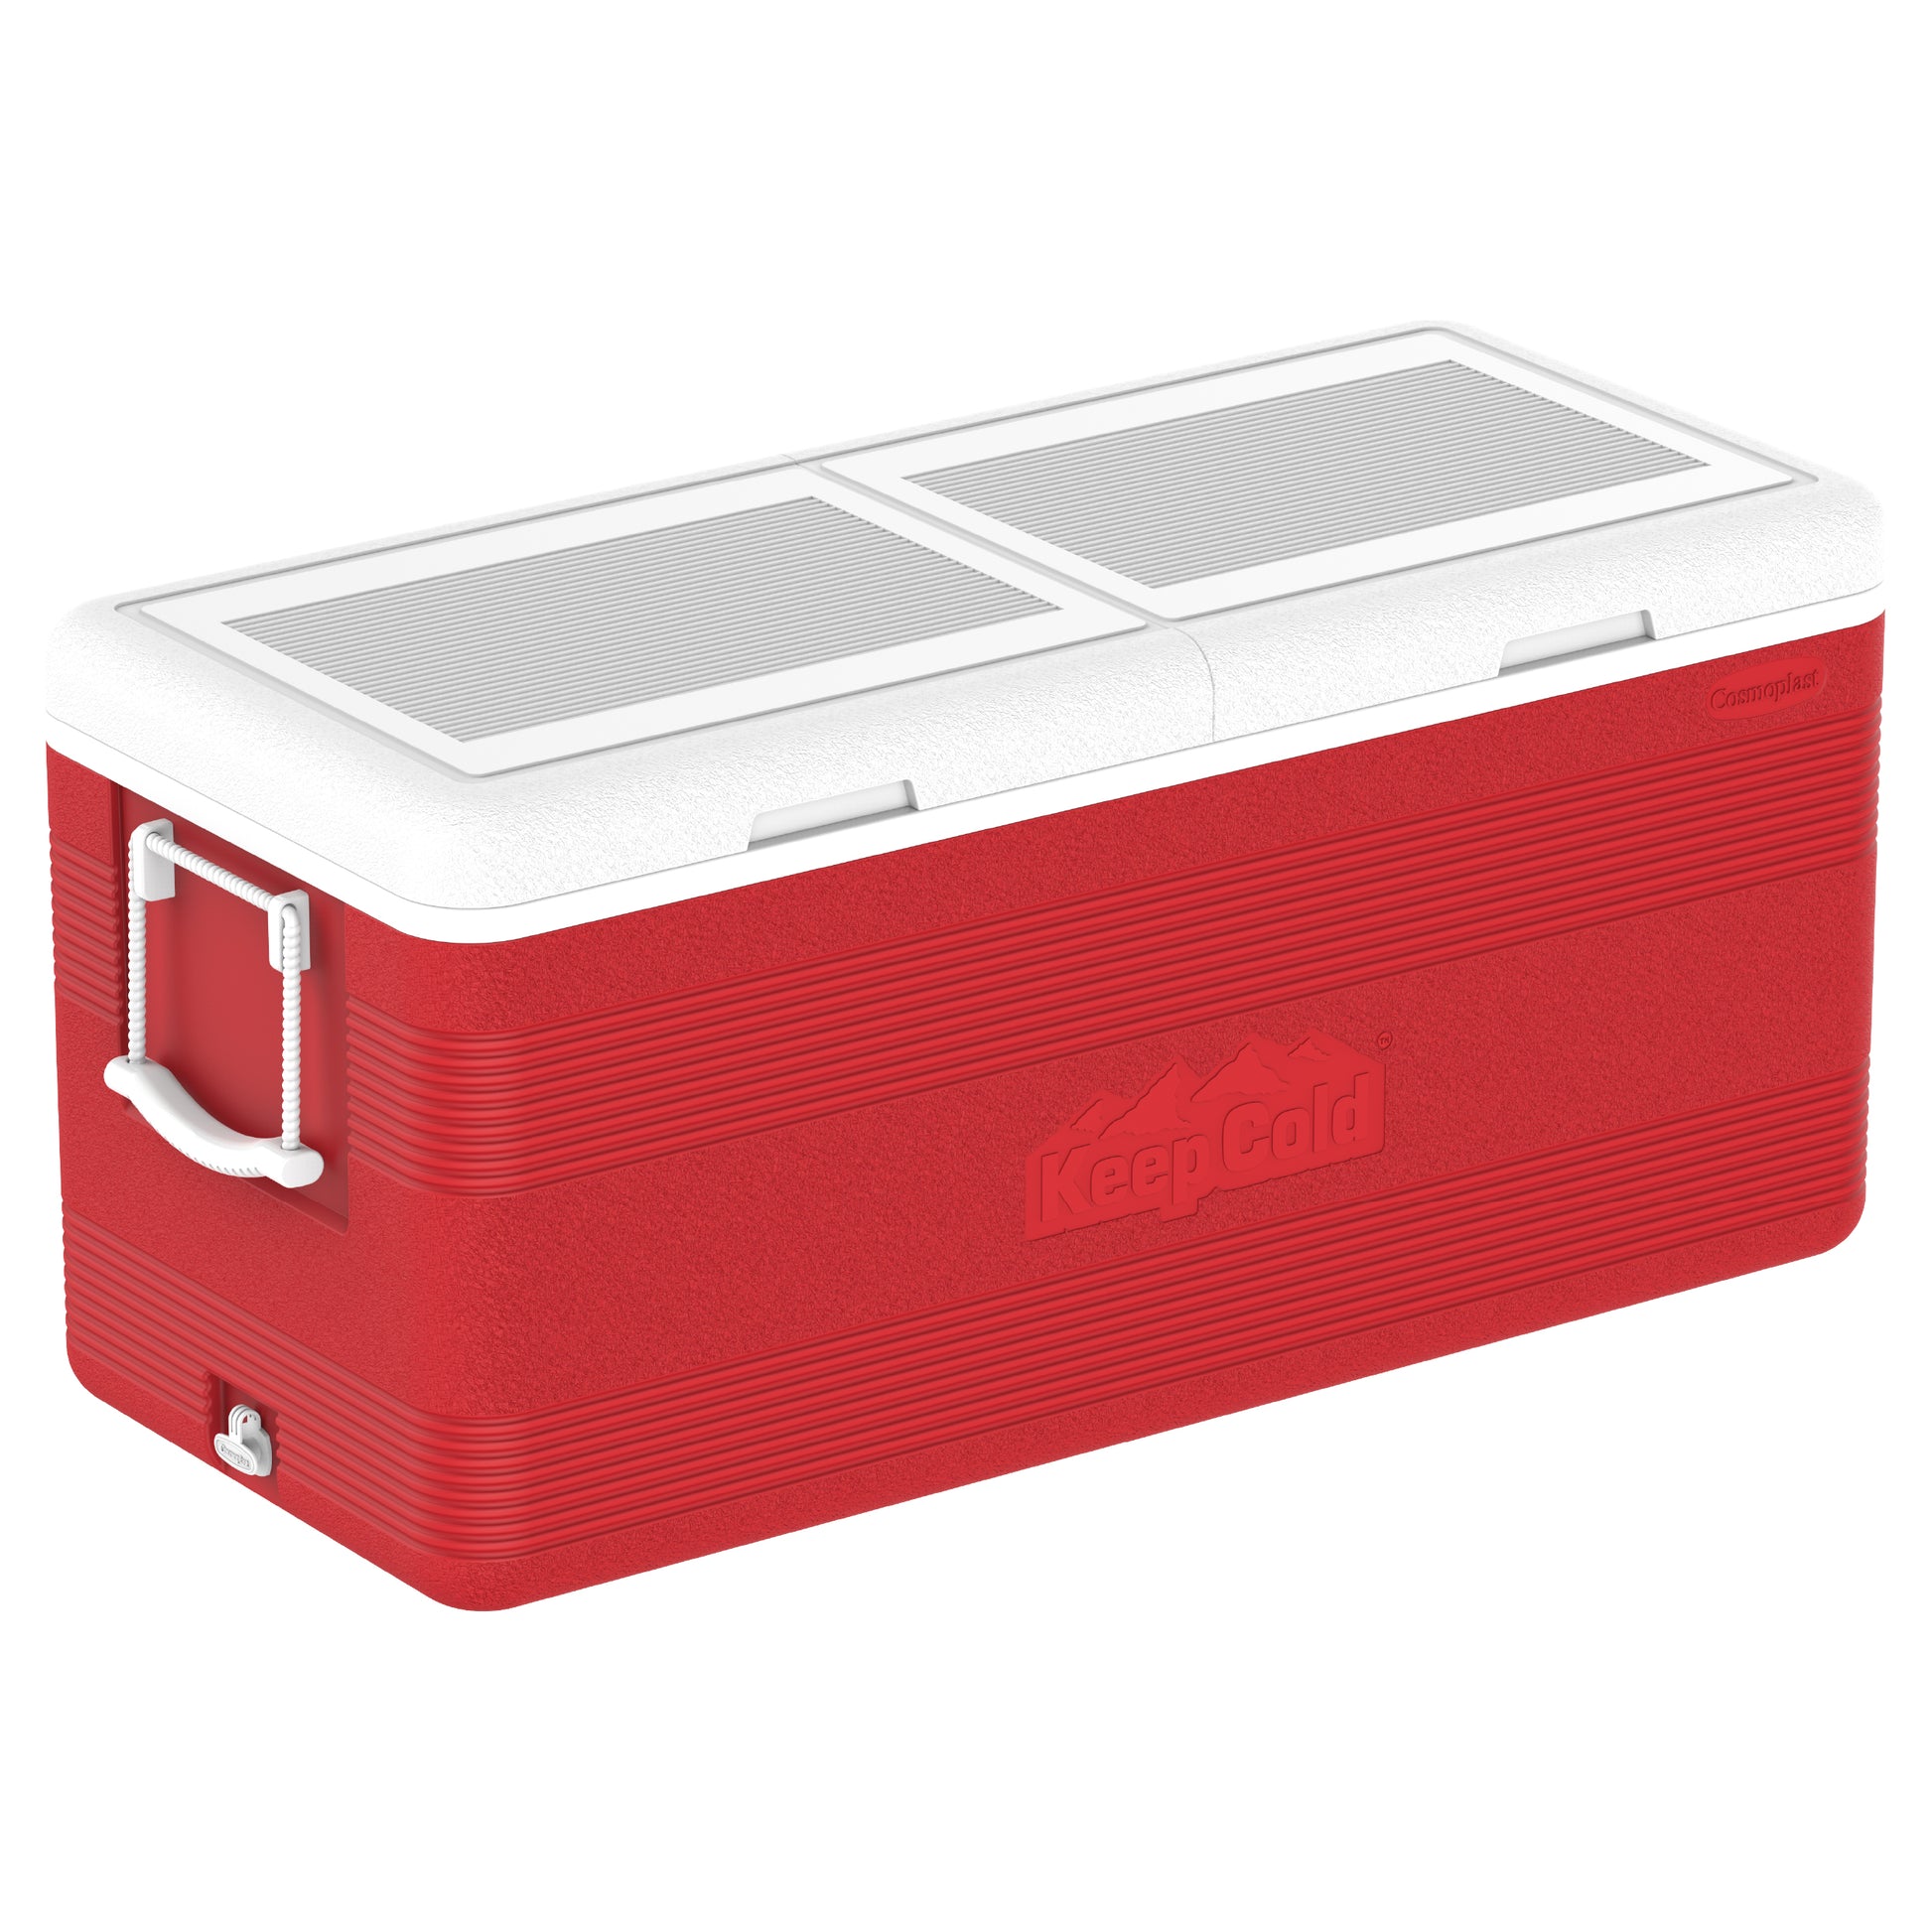 144L KeepCold Deluxe Icebox